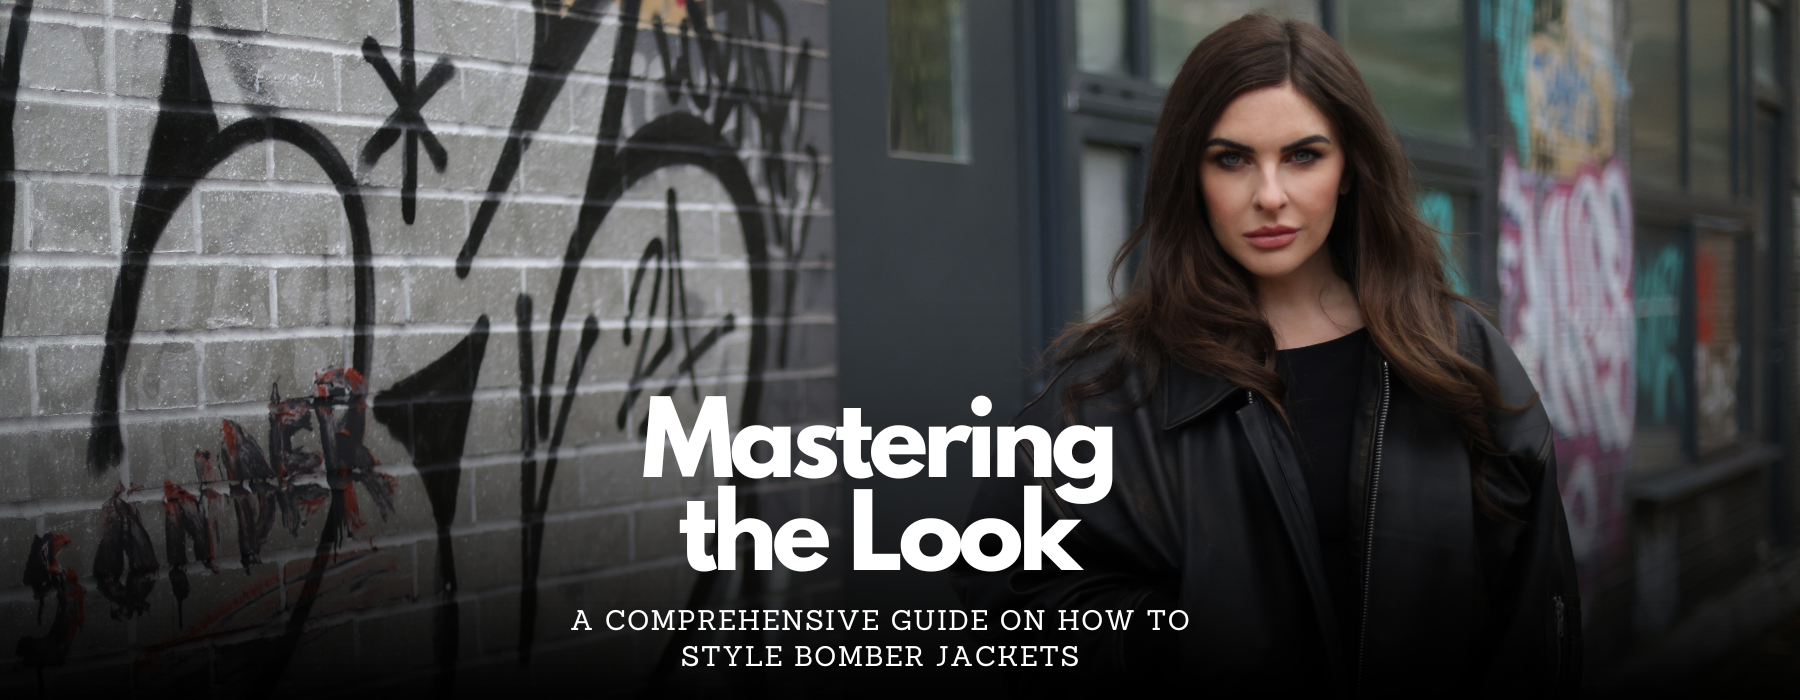 Mastering the Look: A Comprehensive Guide on How to Style Bomber Jackets